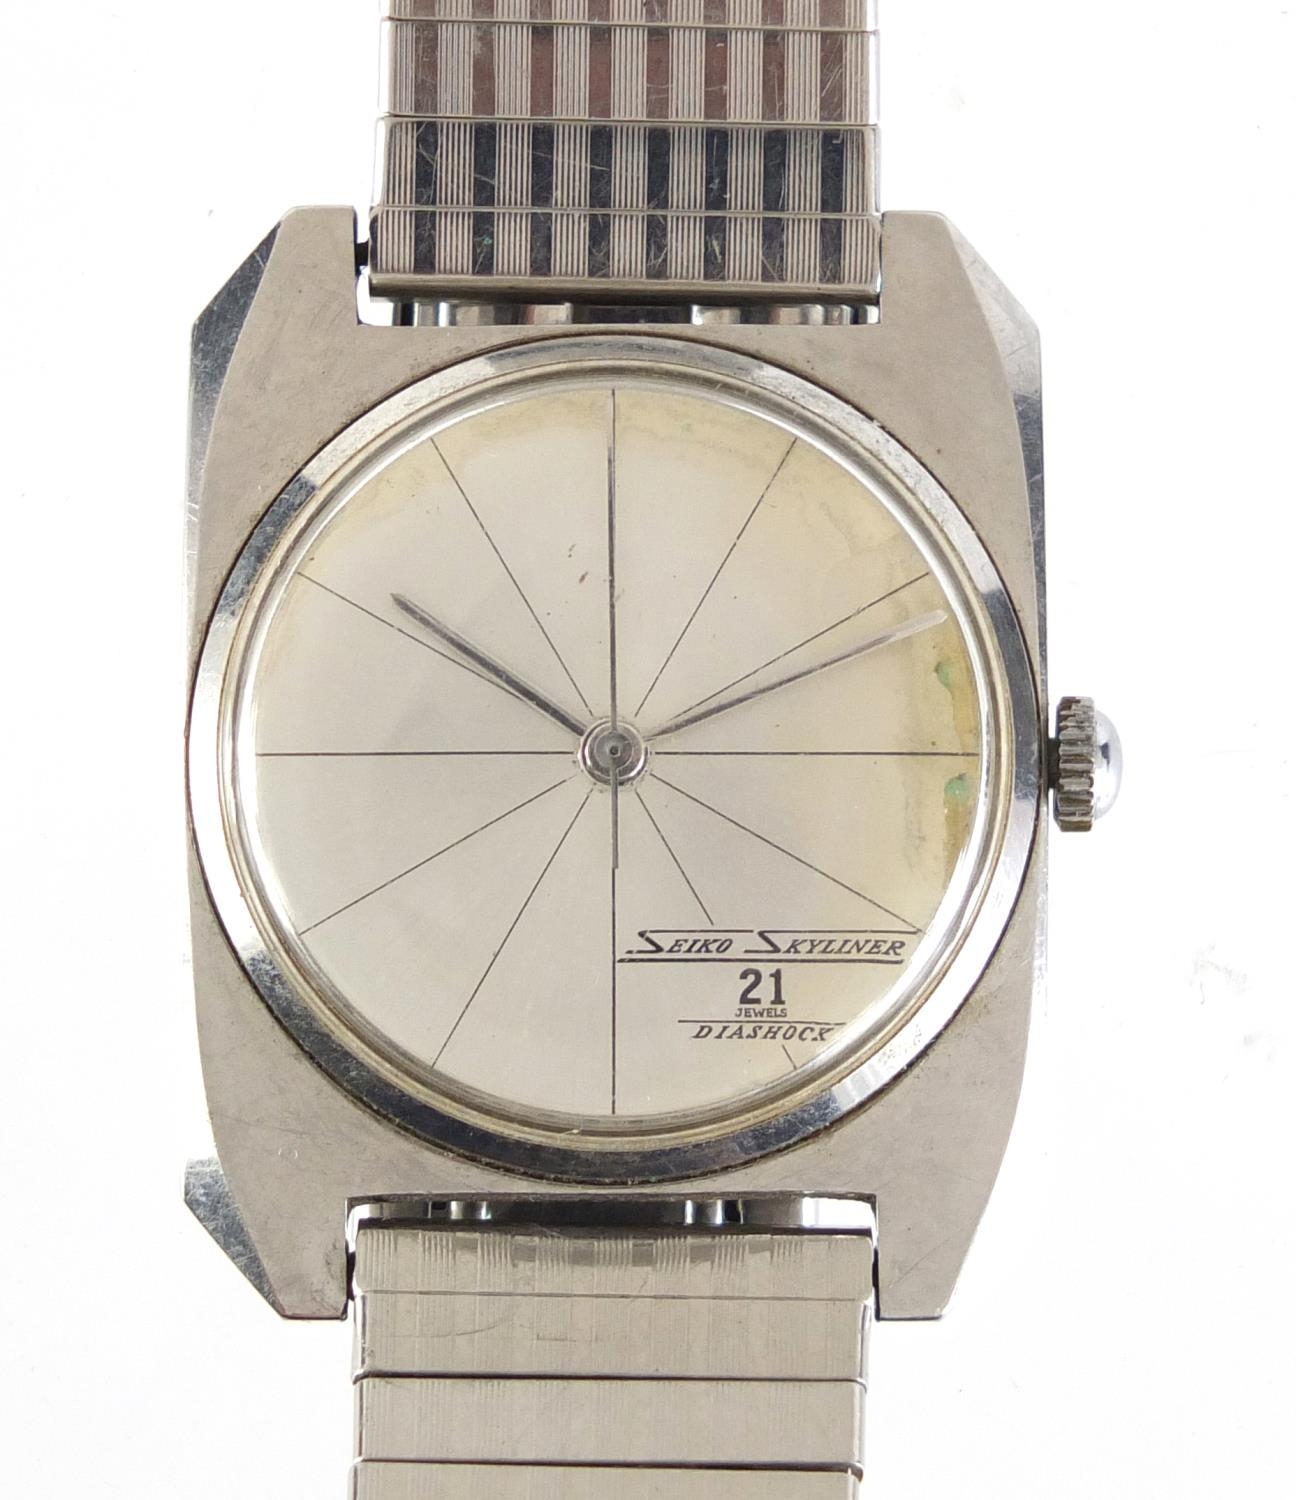 Vintage gentleman's Seiko Skyliner wristwatch, the case numbered 5401132,  30mm across excluding the